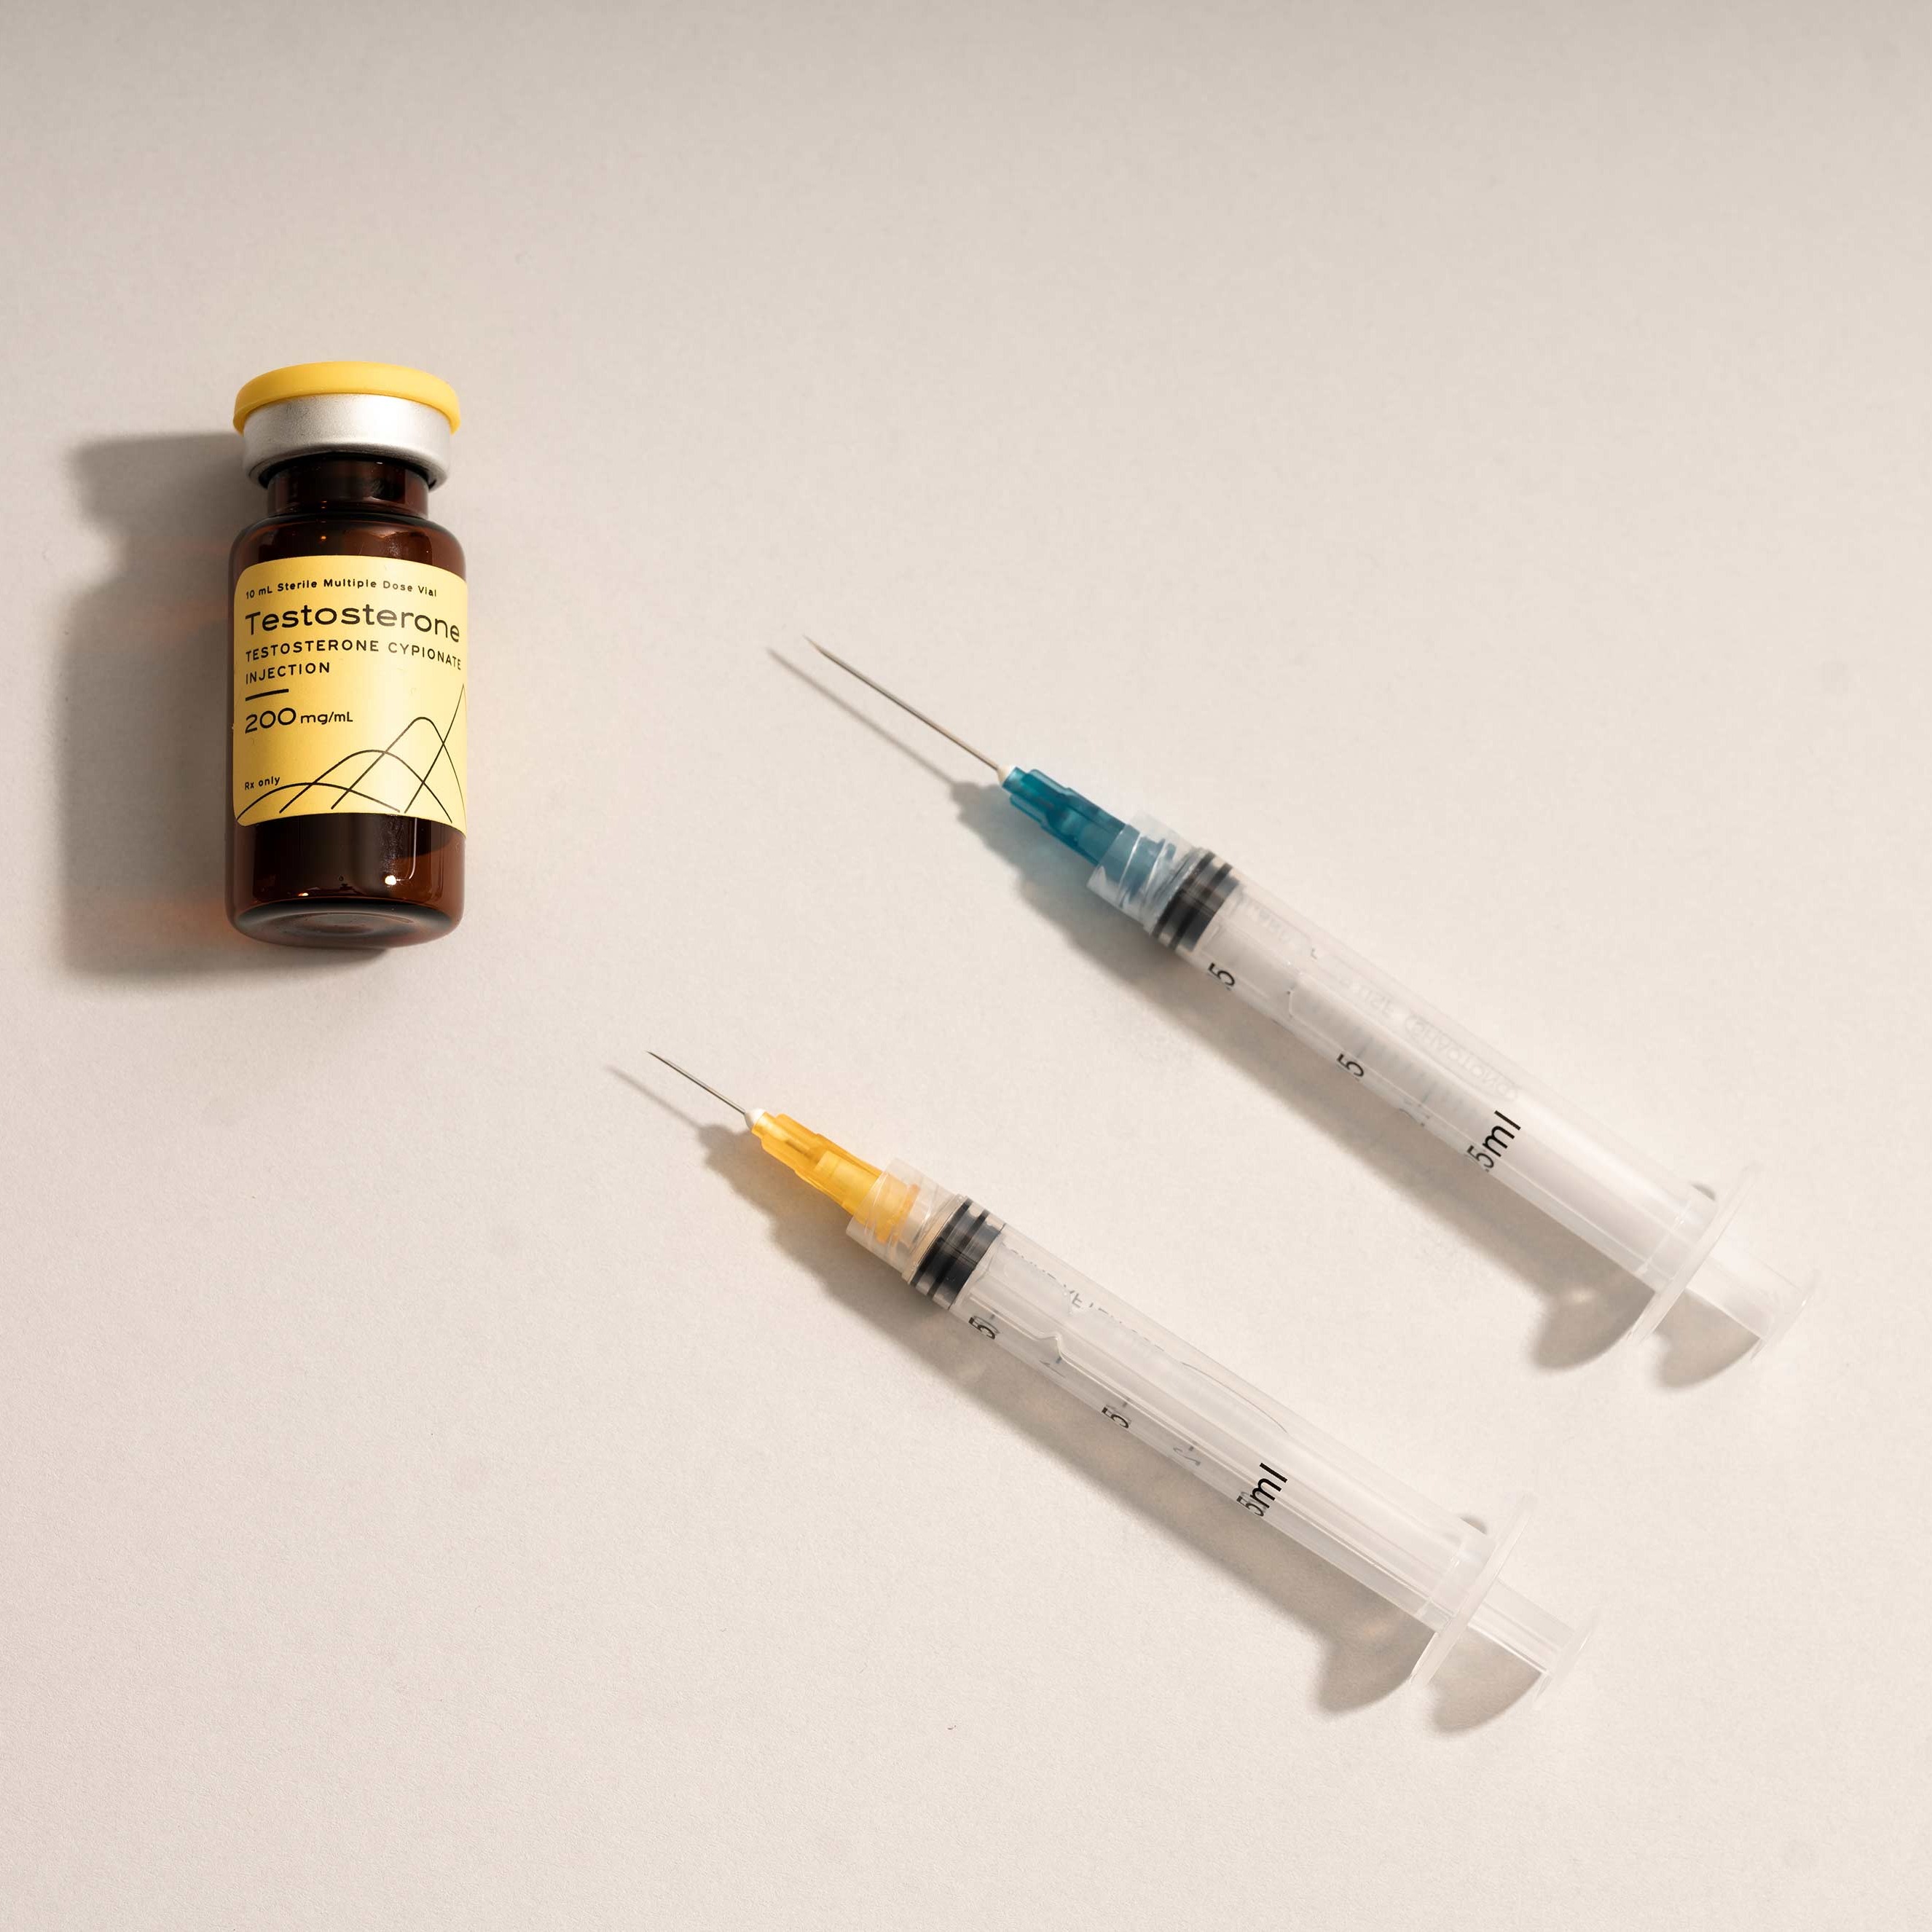 Does Injectable Testosterone Go Bad